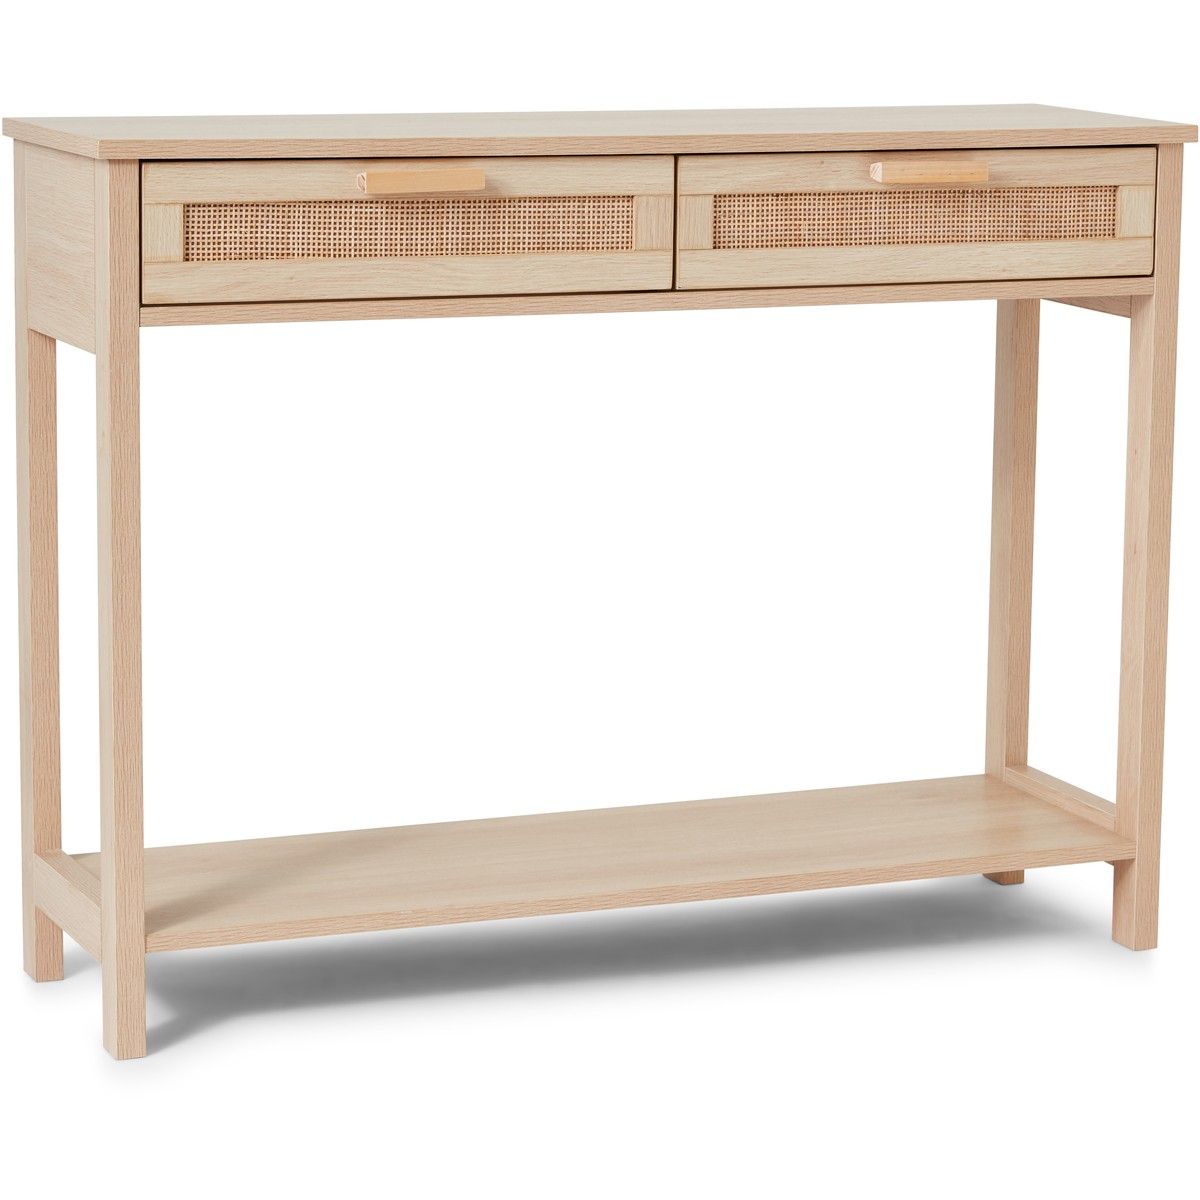 Kodu Hamilton Rattan Console Table | Big W Within Wicker Console Tables (Photo 4 of 20)